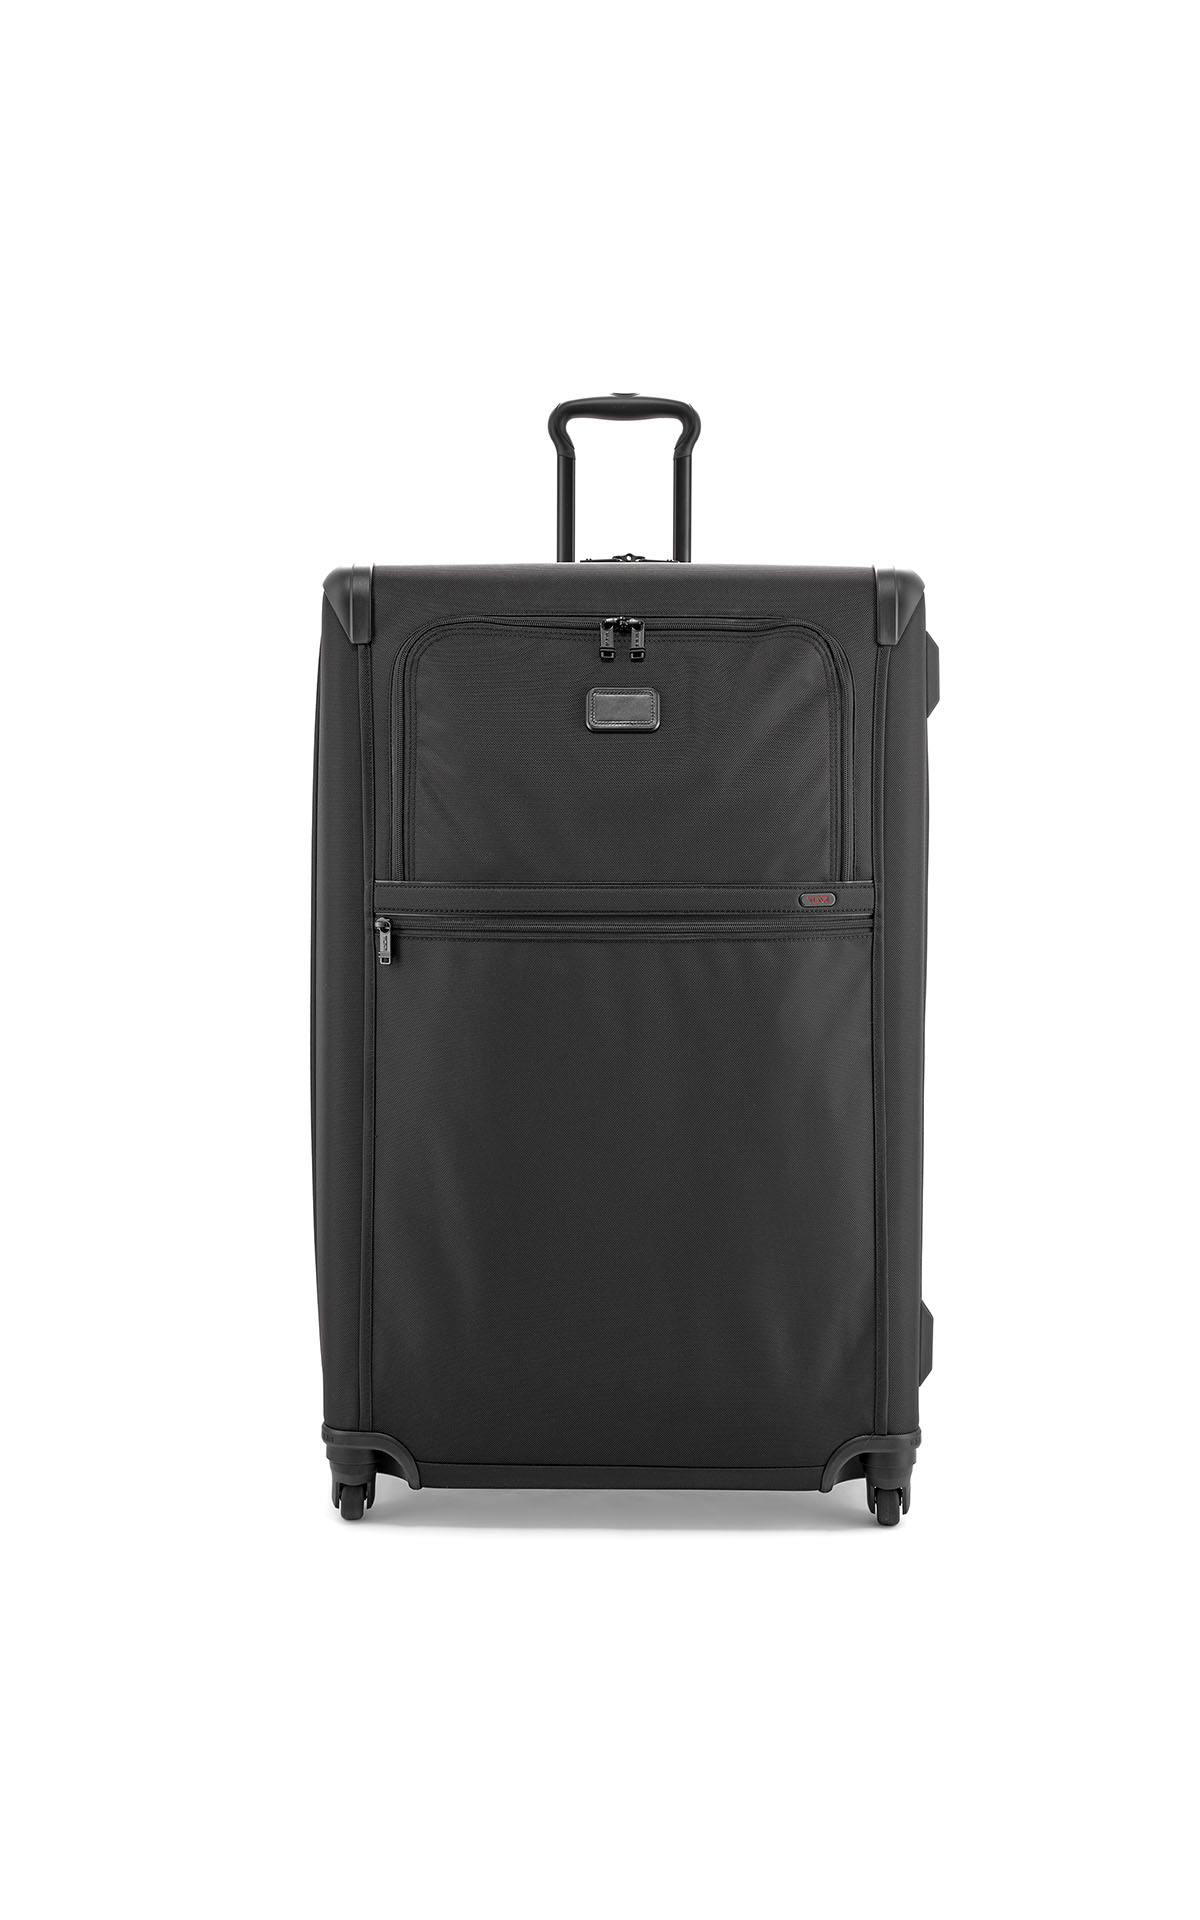 Tumi ww trip exp 4whl p/c at The Bicester Village Shopping Collection